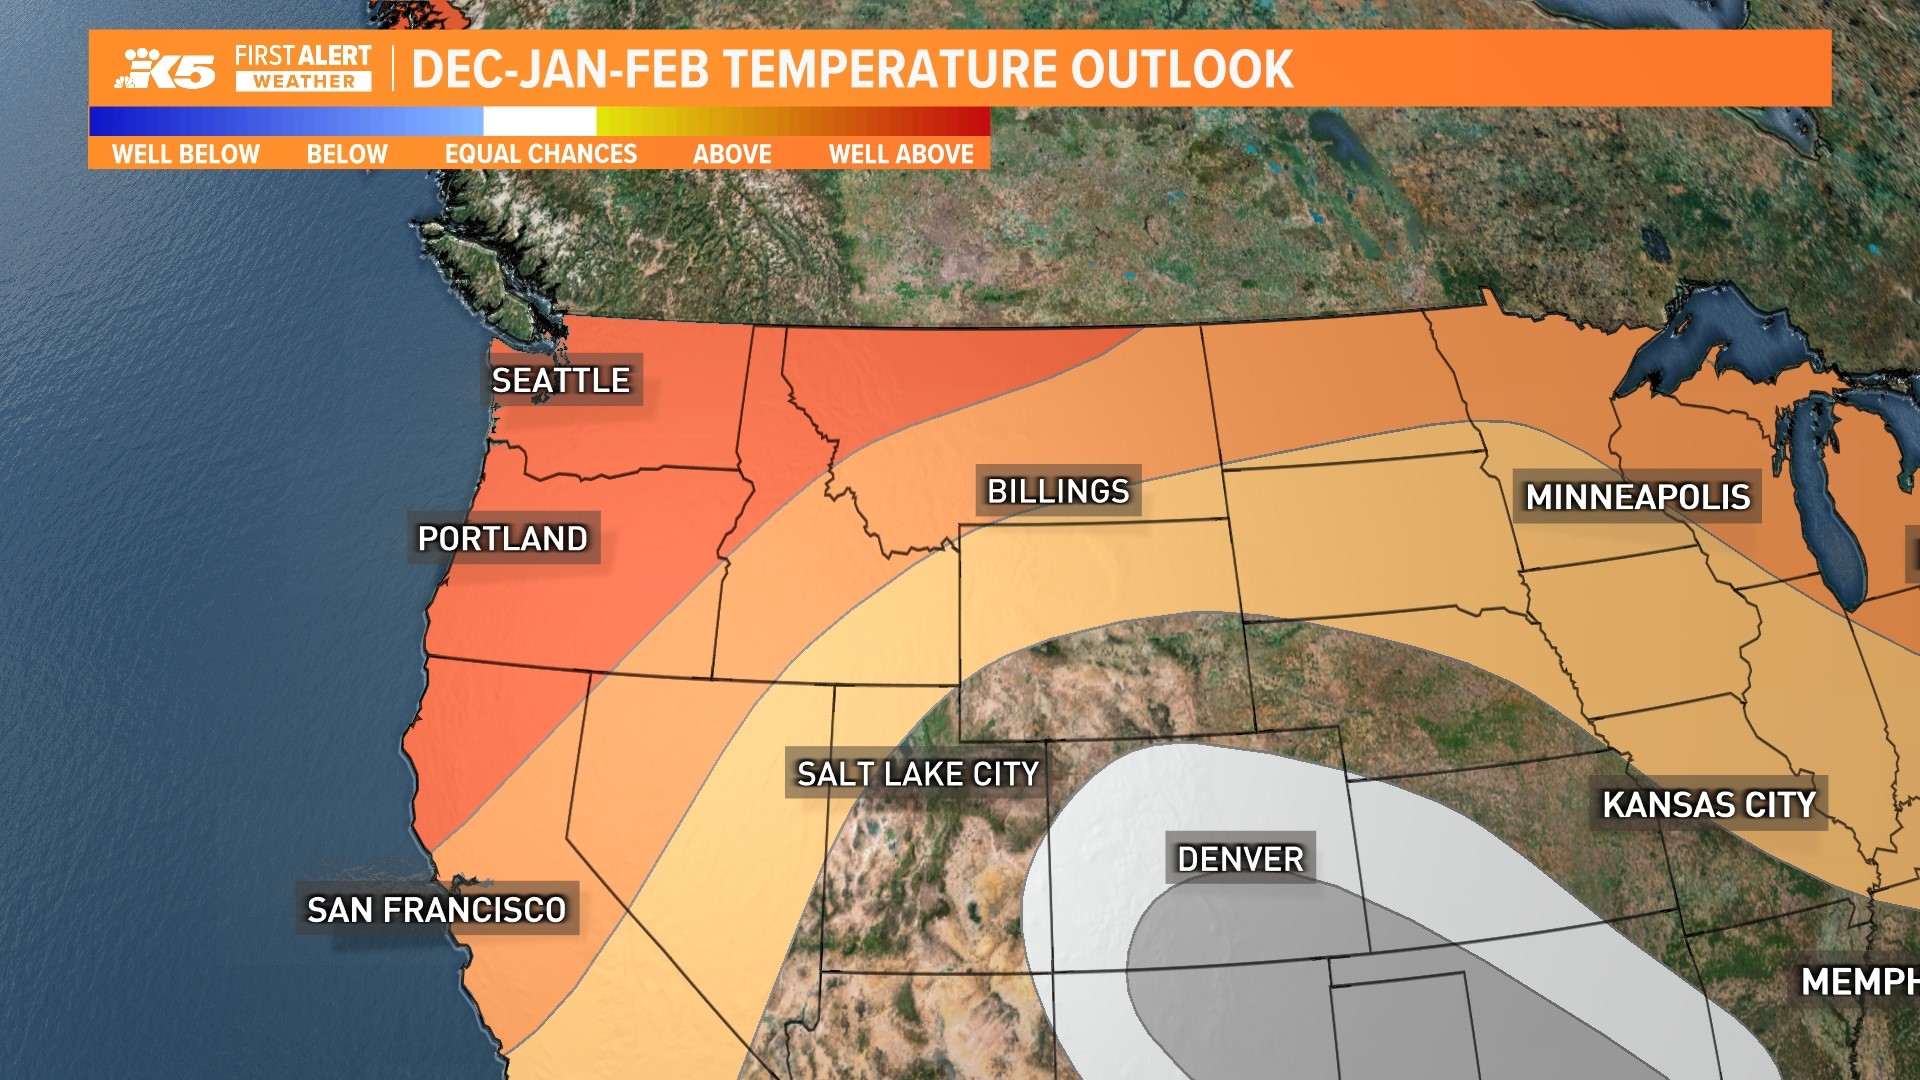 In western Washington, NOAA forecasted a high probability of above-normal temperatures and equal chances of below, near or above-normal precipitation this winter.